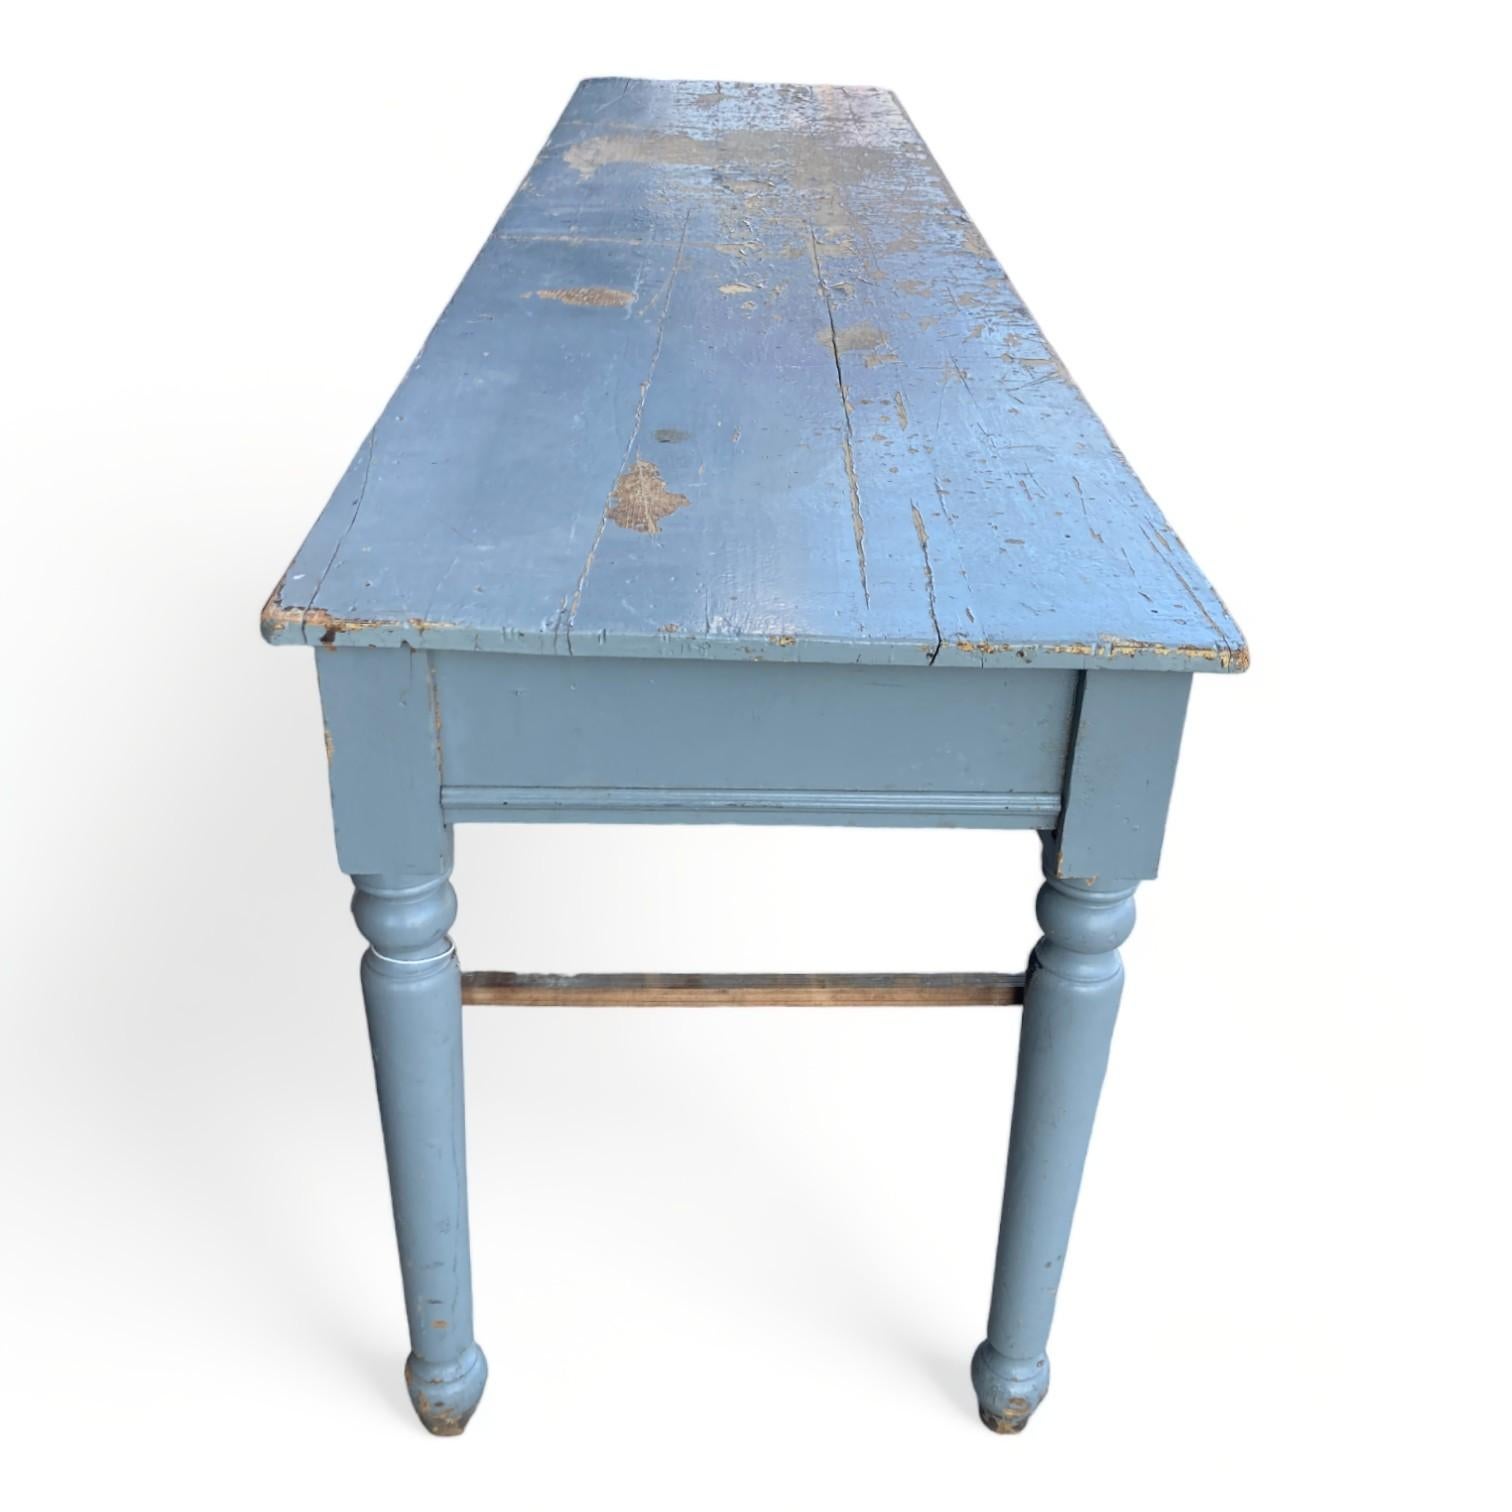 Our vintage farm console has a weathered surface with remnants of its original blue paint, creating a rustic and substantial statement piece. At 104